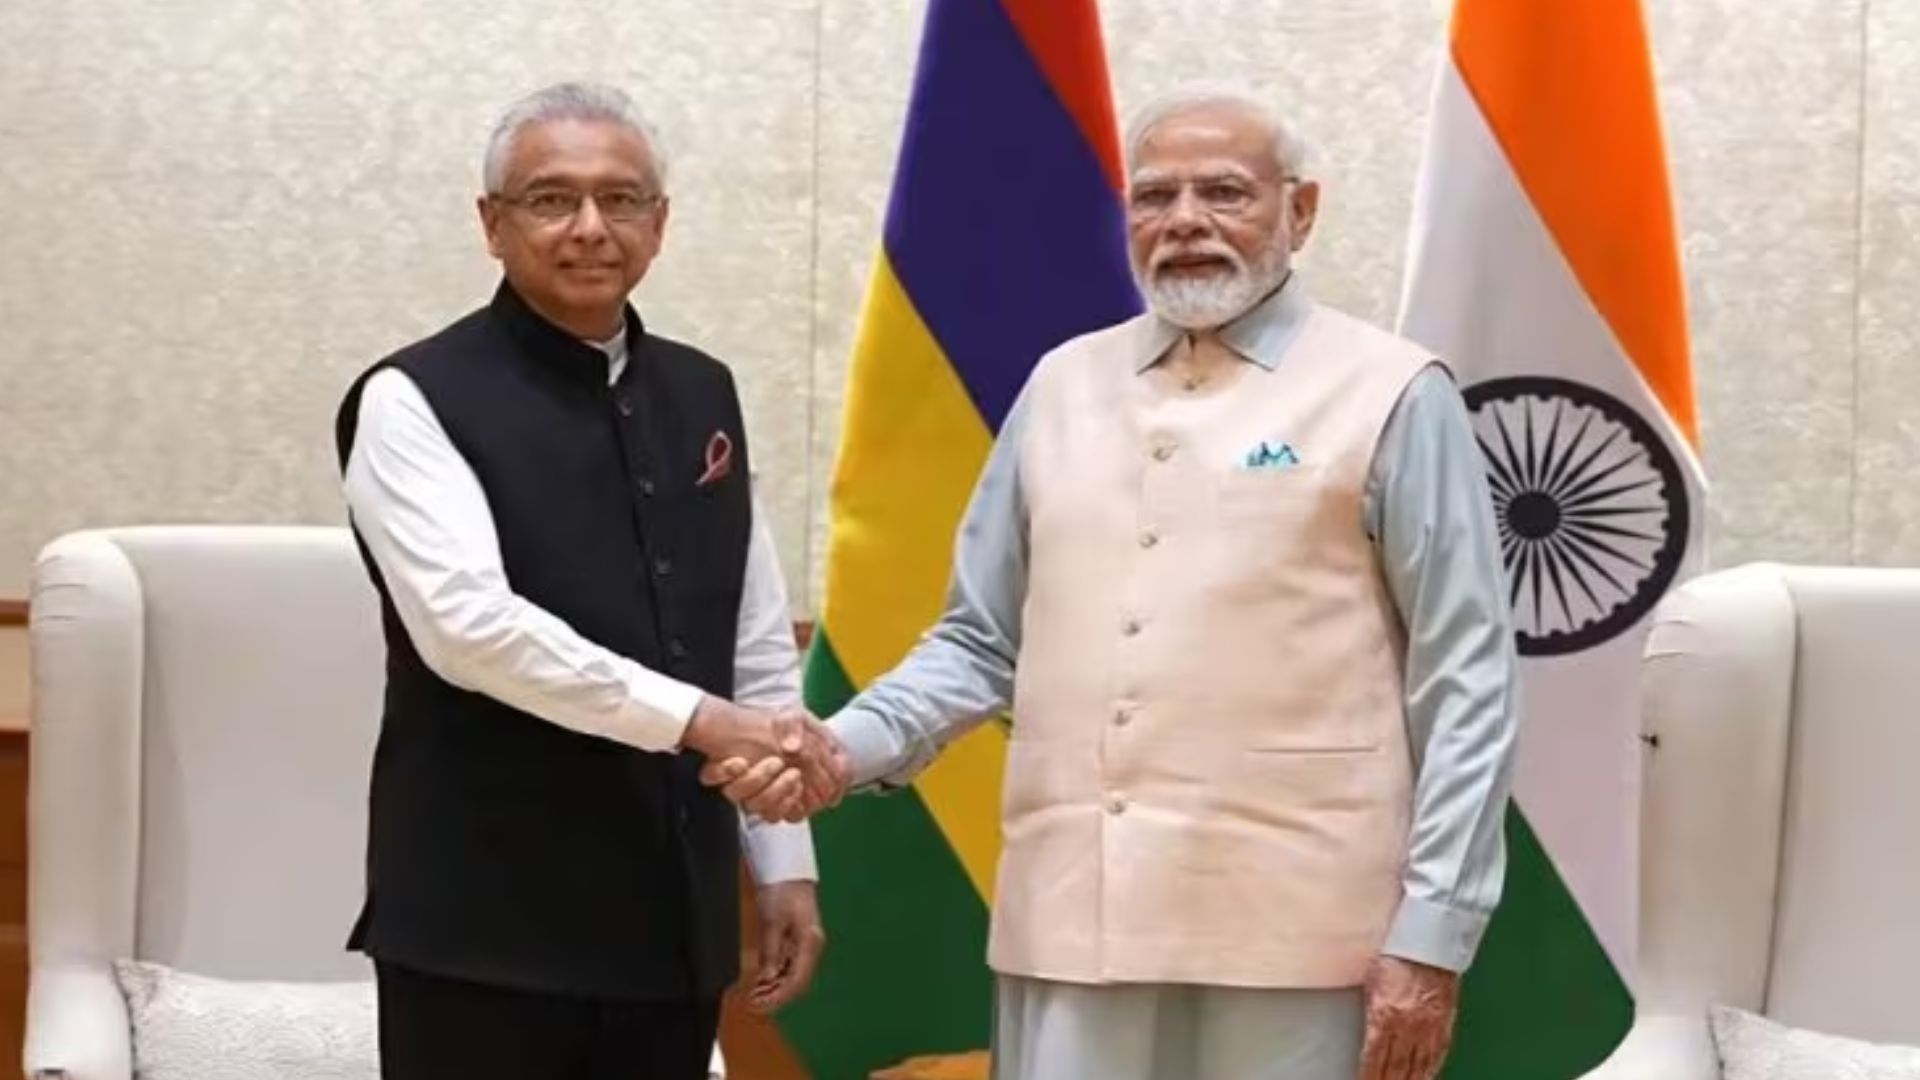 PM Modi and Mauritius Counterpart to Inaugurate Community Projects in Joint Event Today